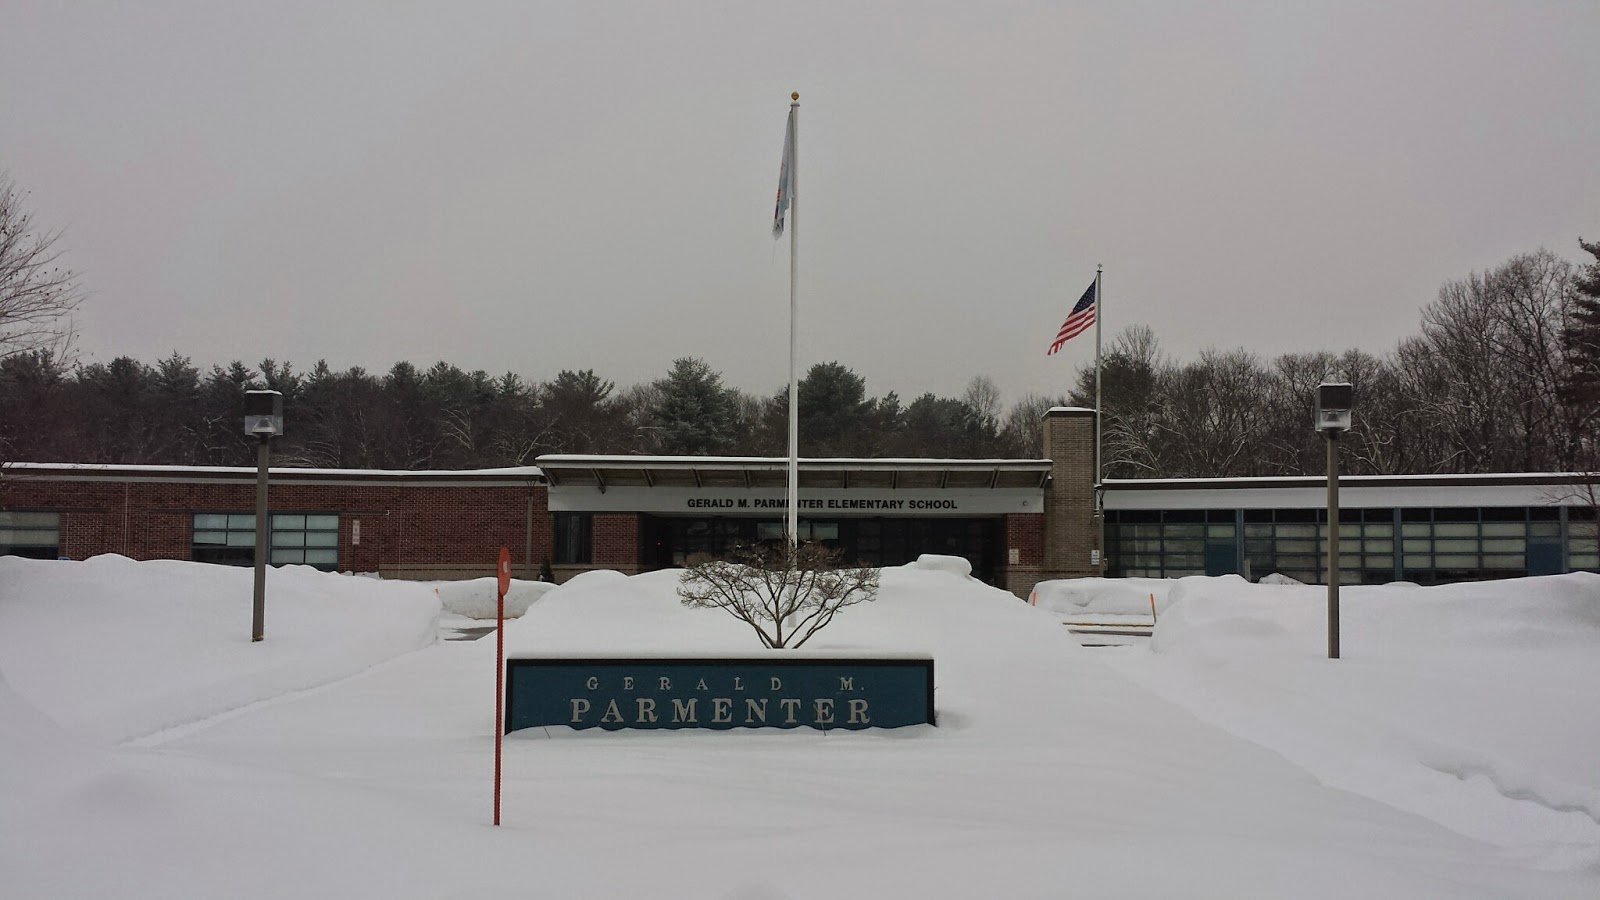 Parmenter Elementary School, in the snow Sunday morning, Feb 8th